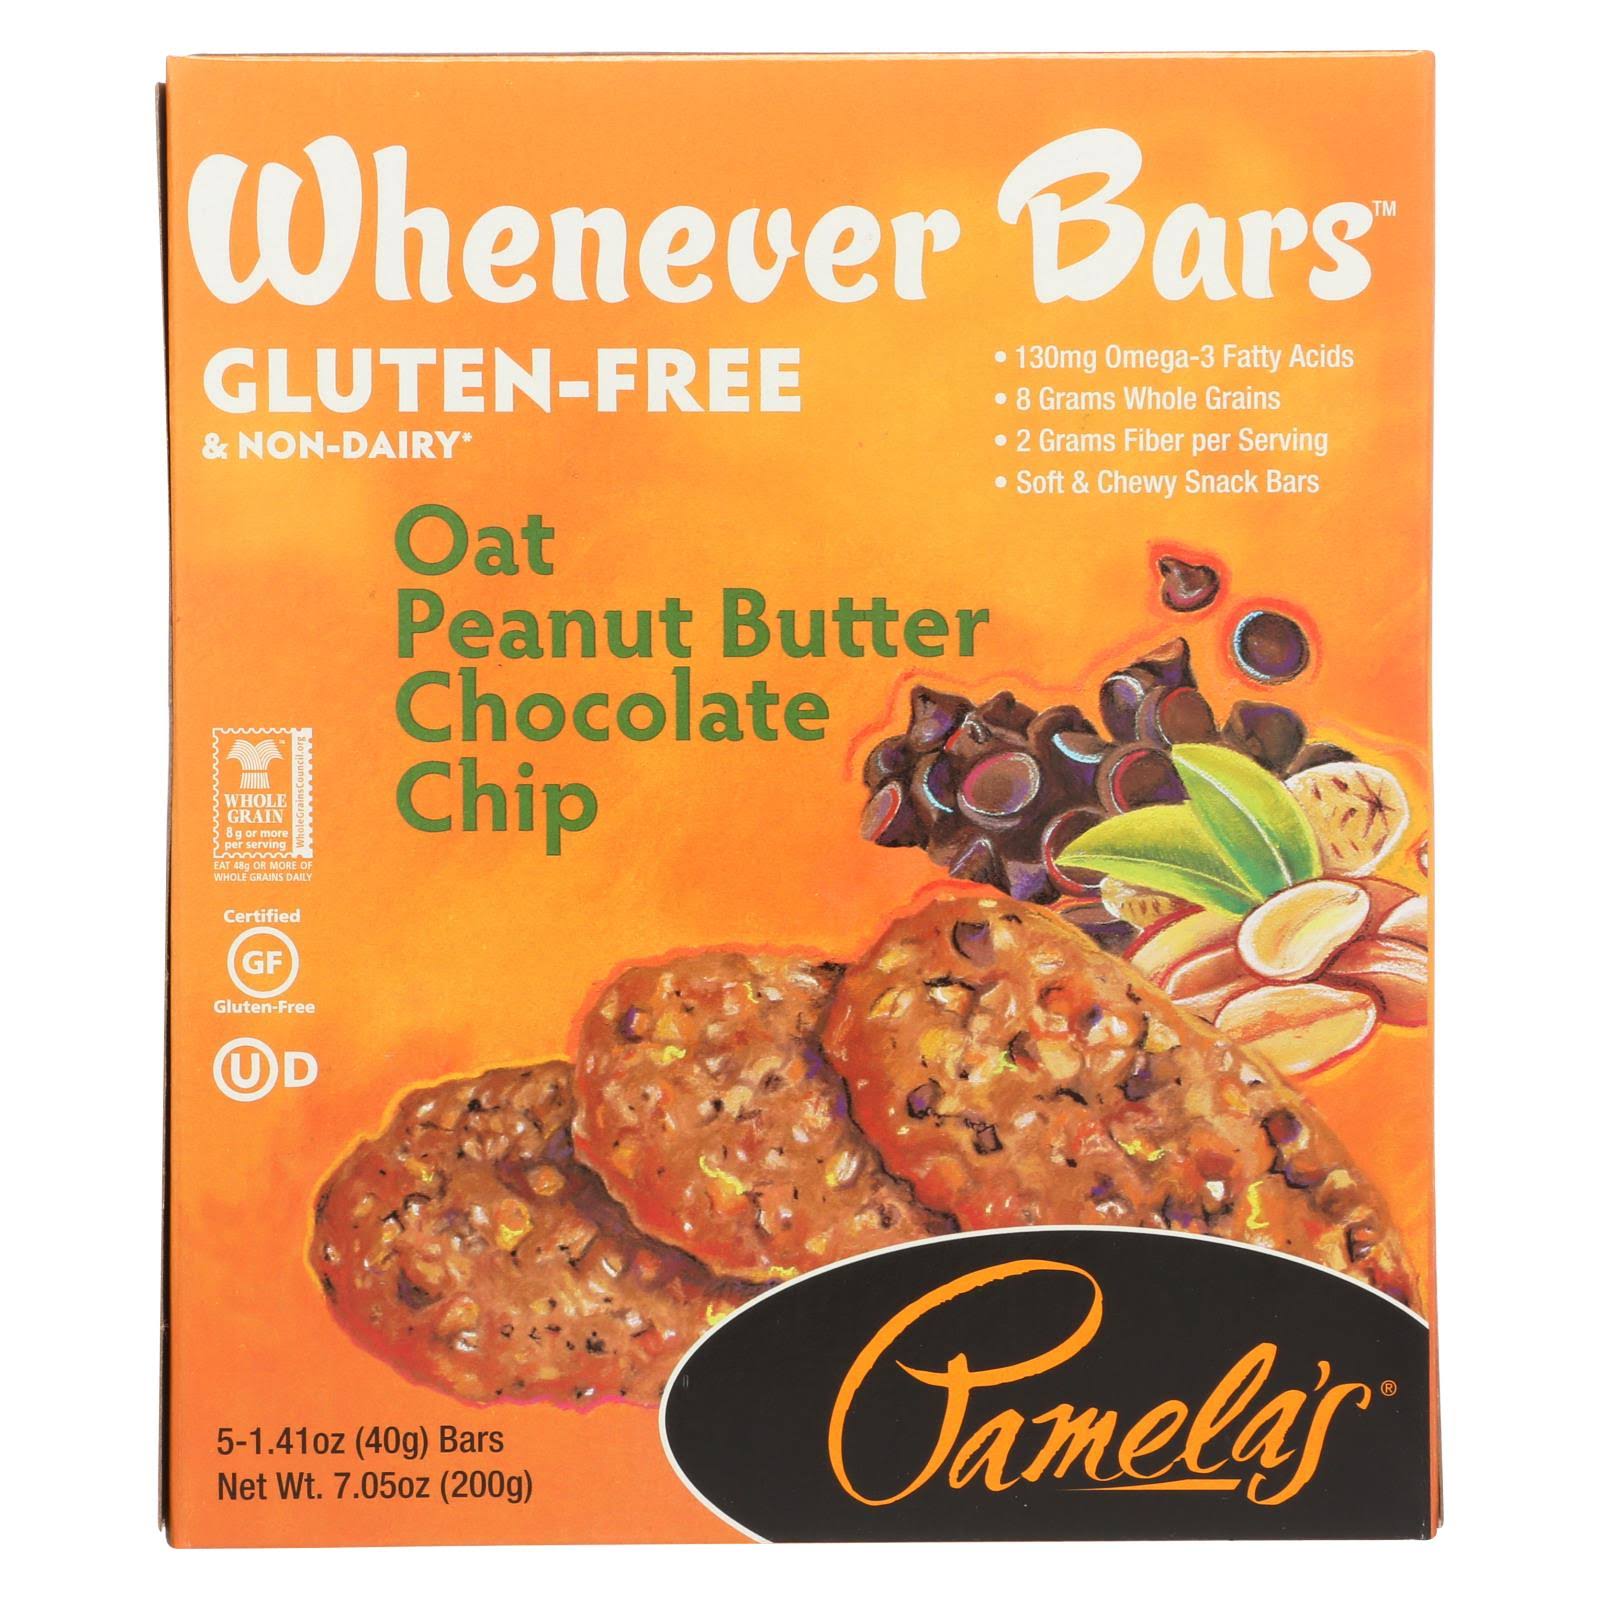 Pamela's Products - Whenever Bars Chocolate Chip - Peanut Oat Butter - Case Of 6 - 7.05 Oz.